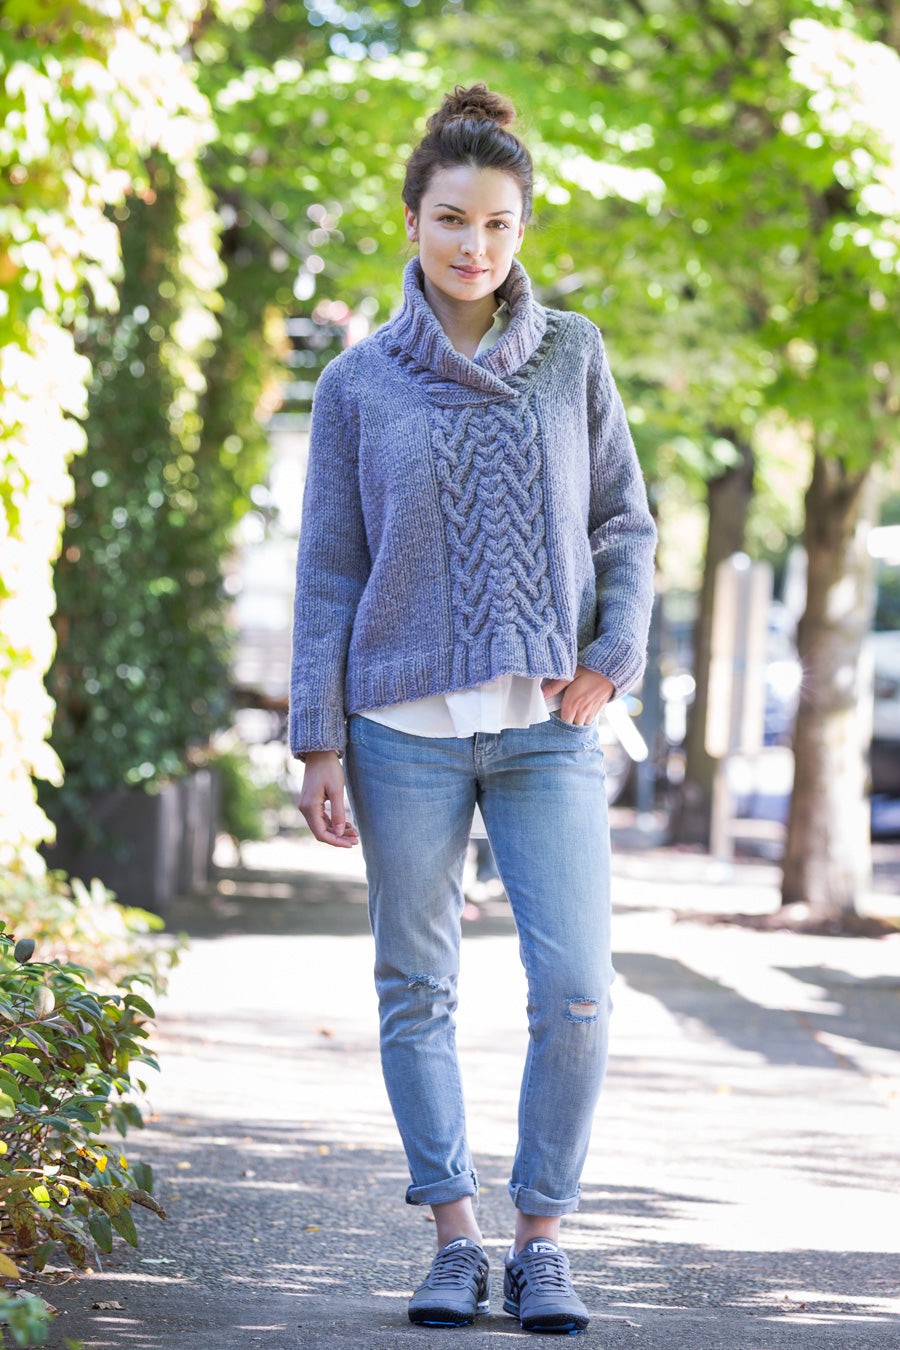 Vogue Knitting Pattern. Boat-Neck pullover #tbt — for the love of knitwear